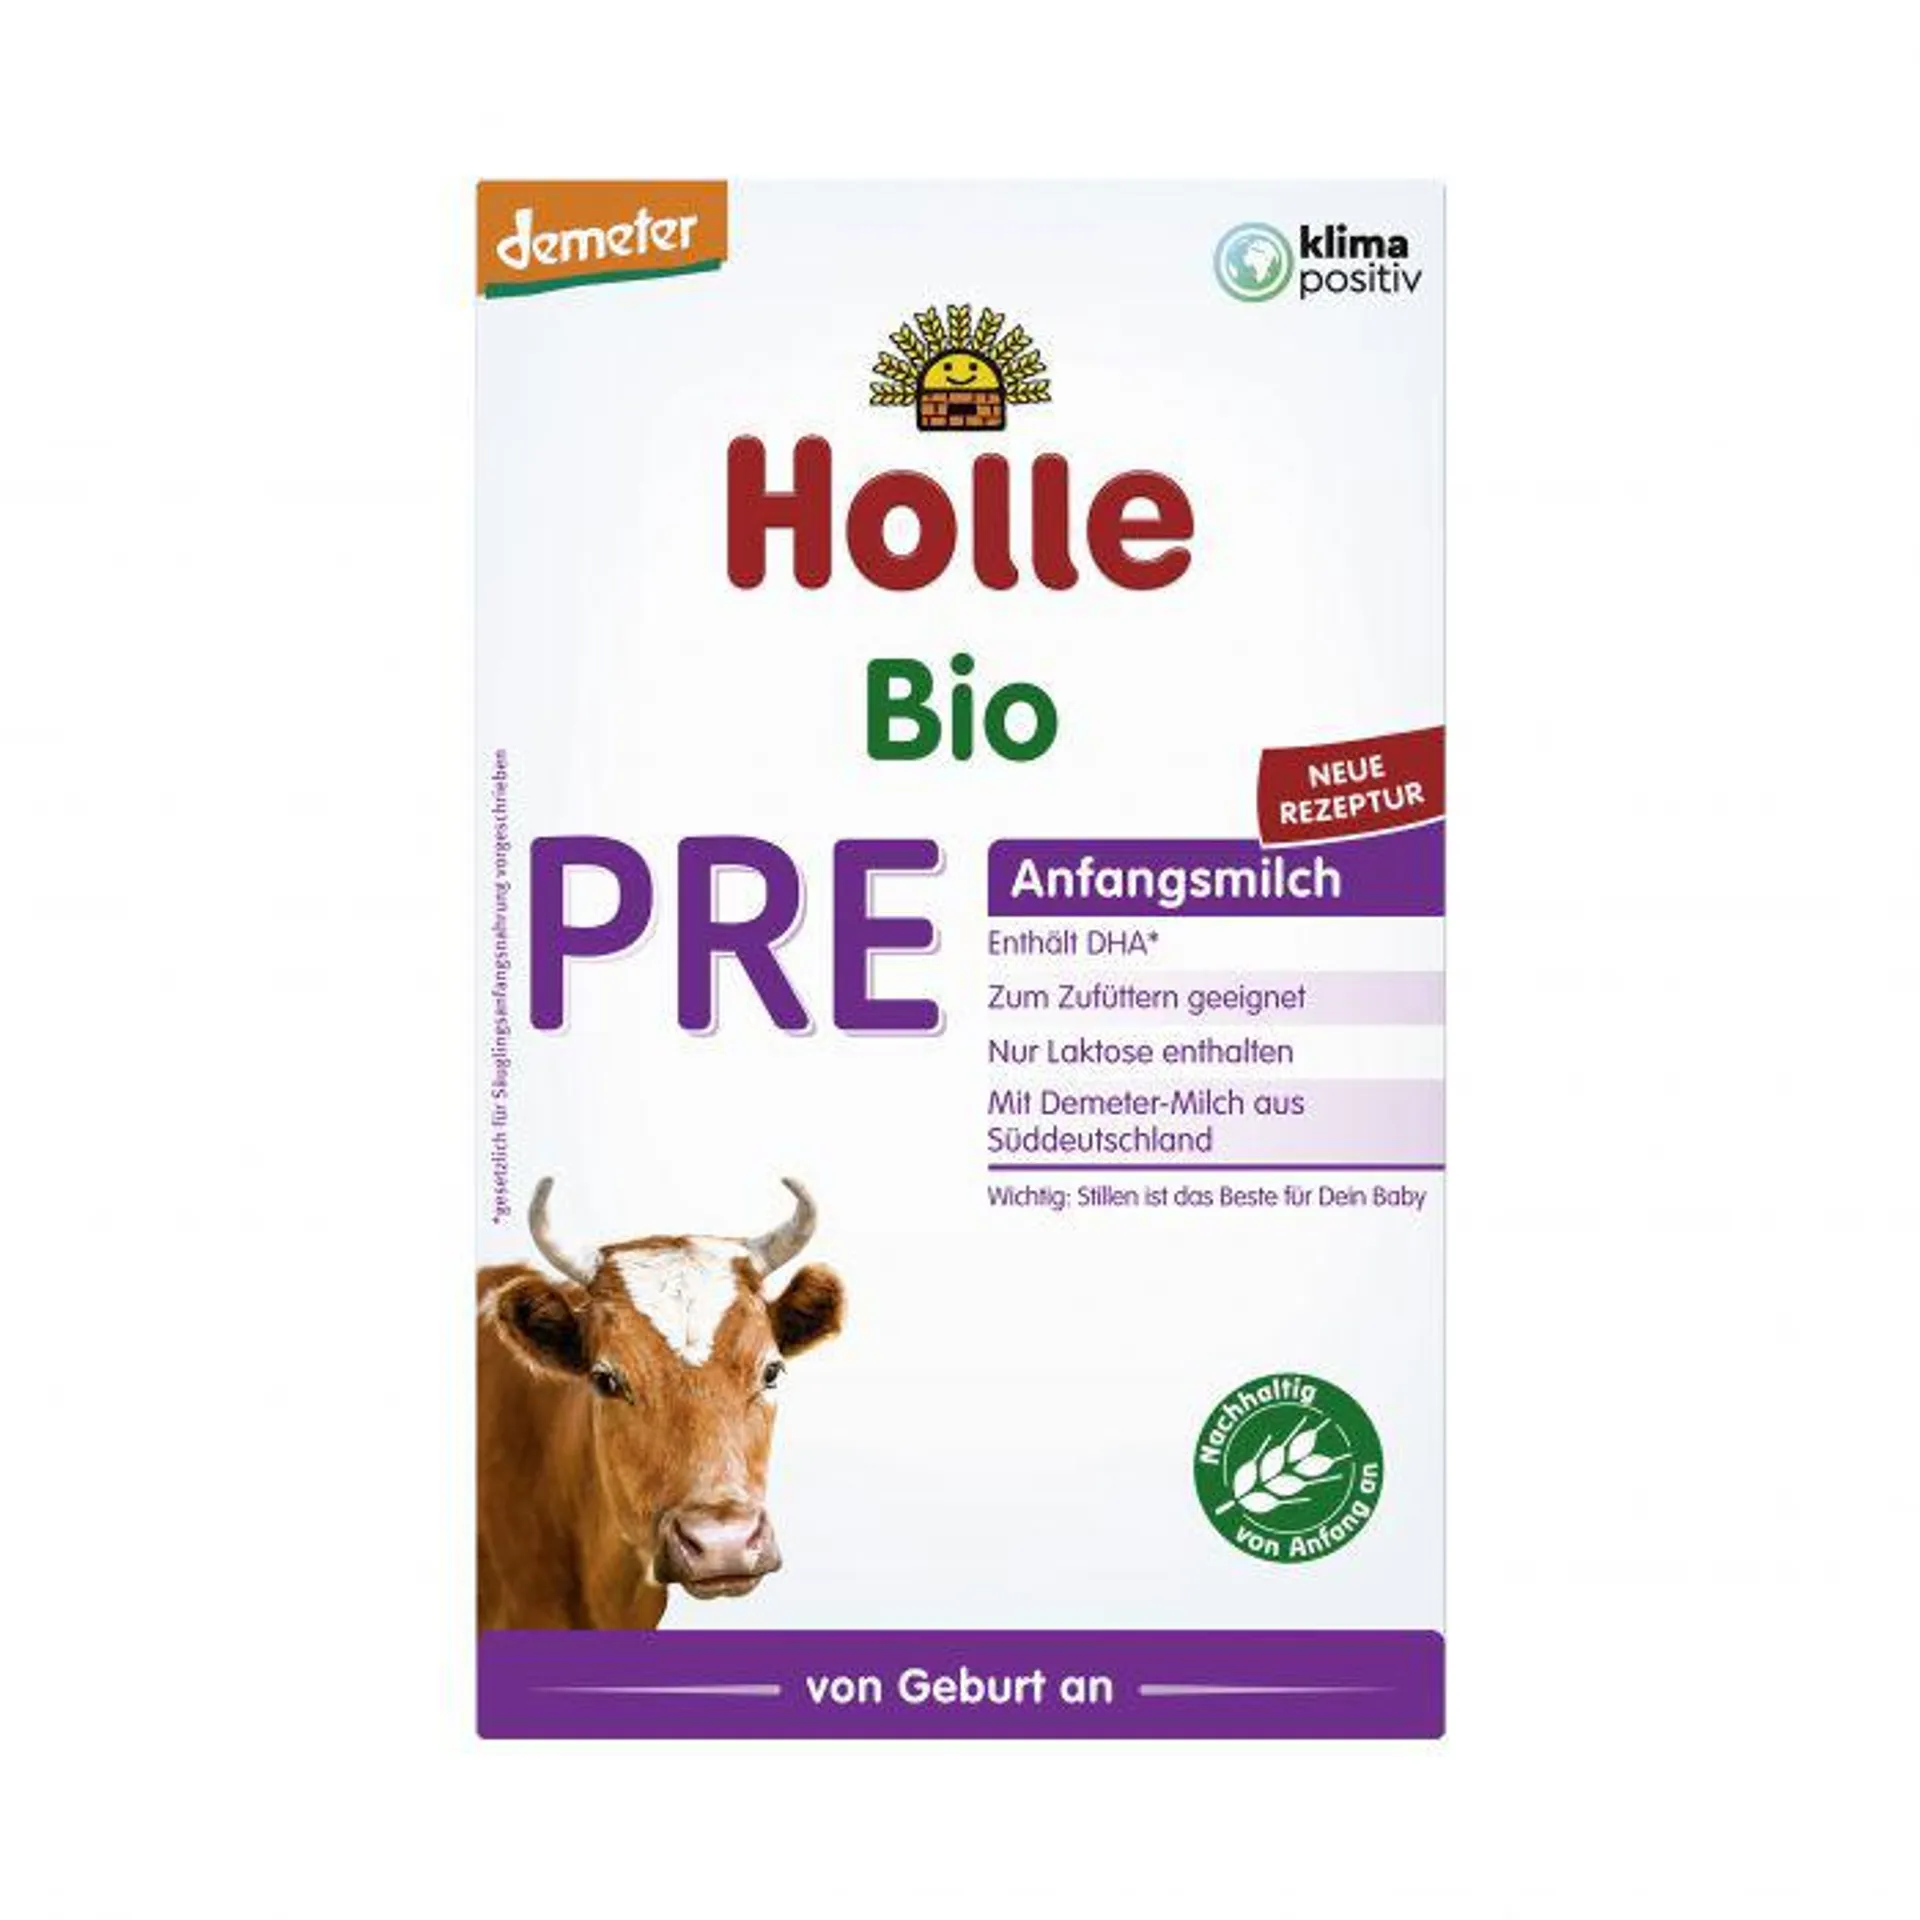 Holle Pre-Anfangsmilch 400g